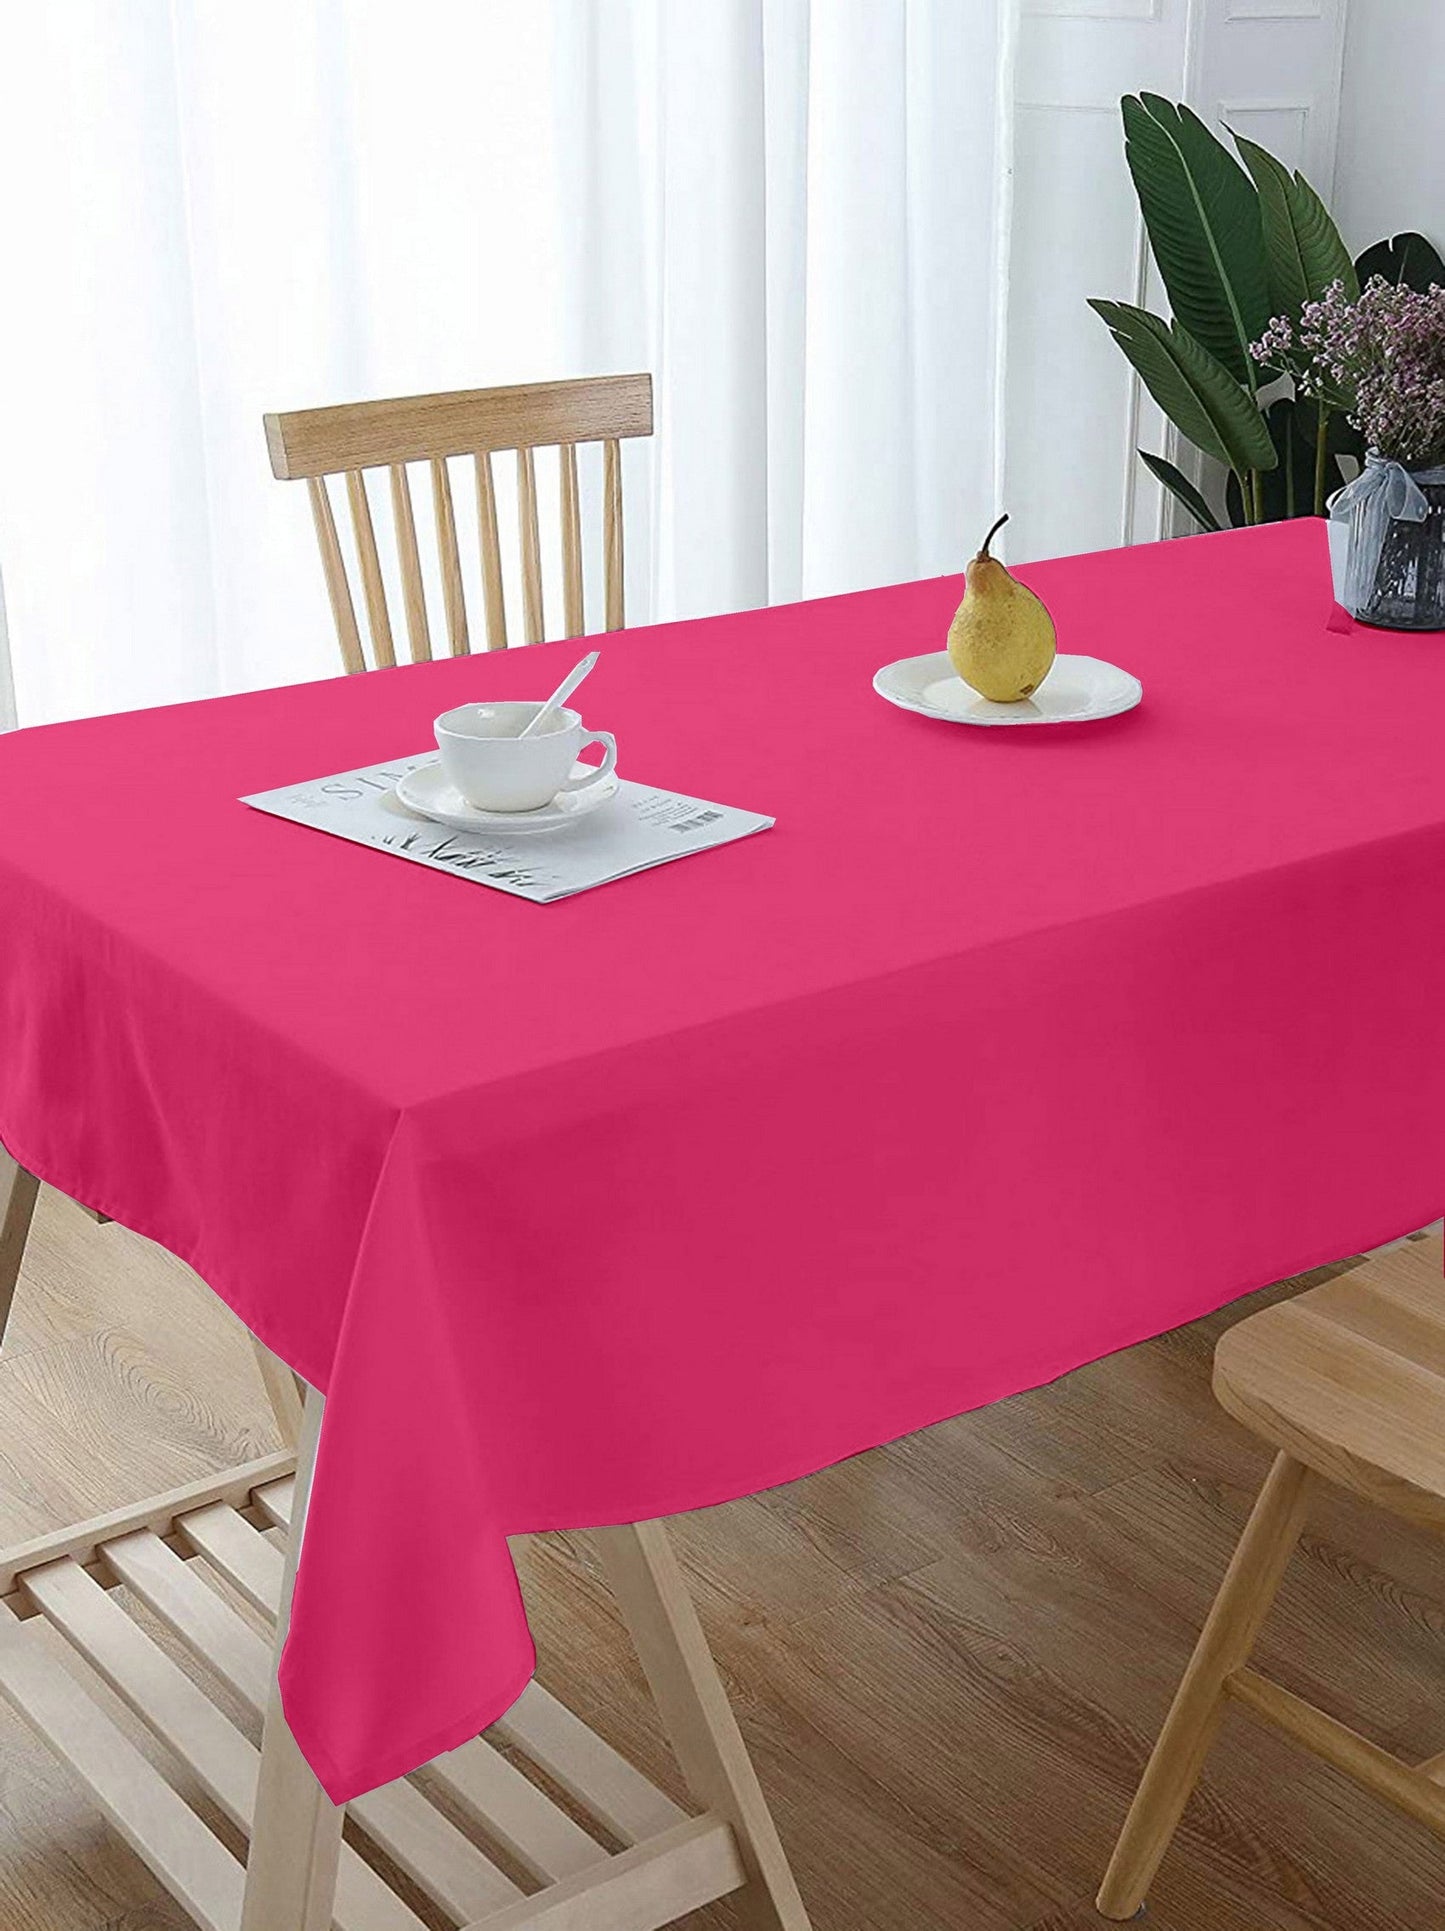 Lushomes center table cover Rose Pink Classic Plain Dining Table Cover Cloth  table cloth for centre table center table cover dining table cover Size 36 x 60 Center Table Cloth